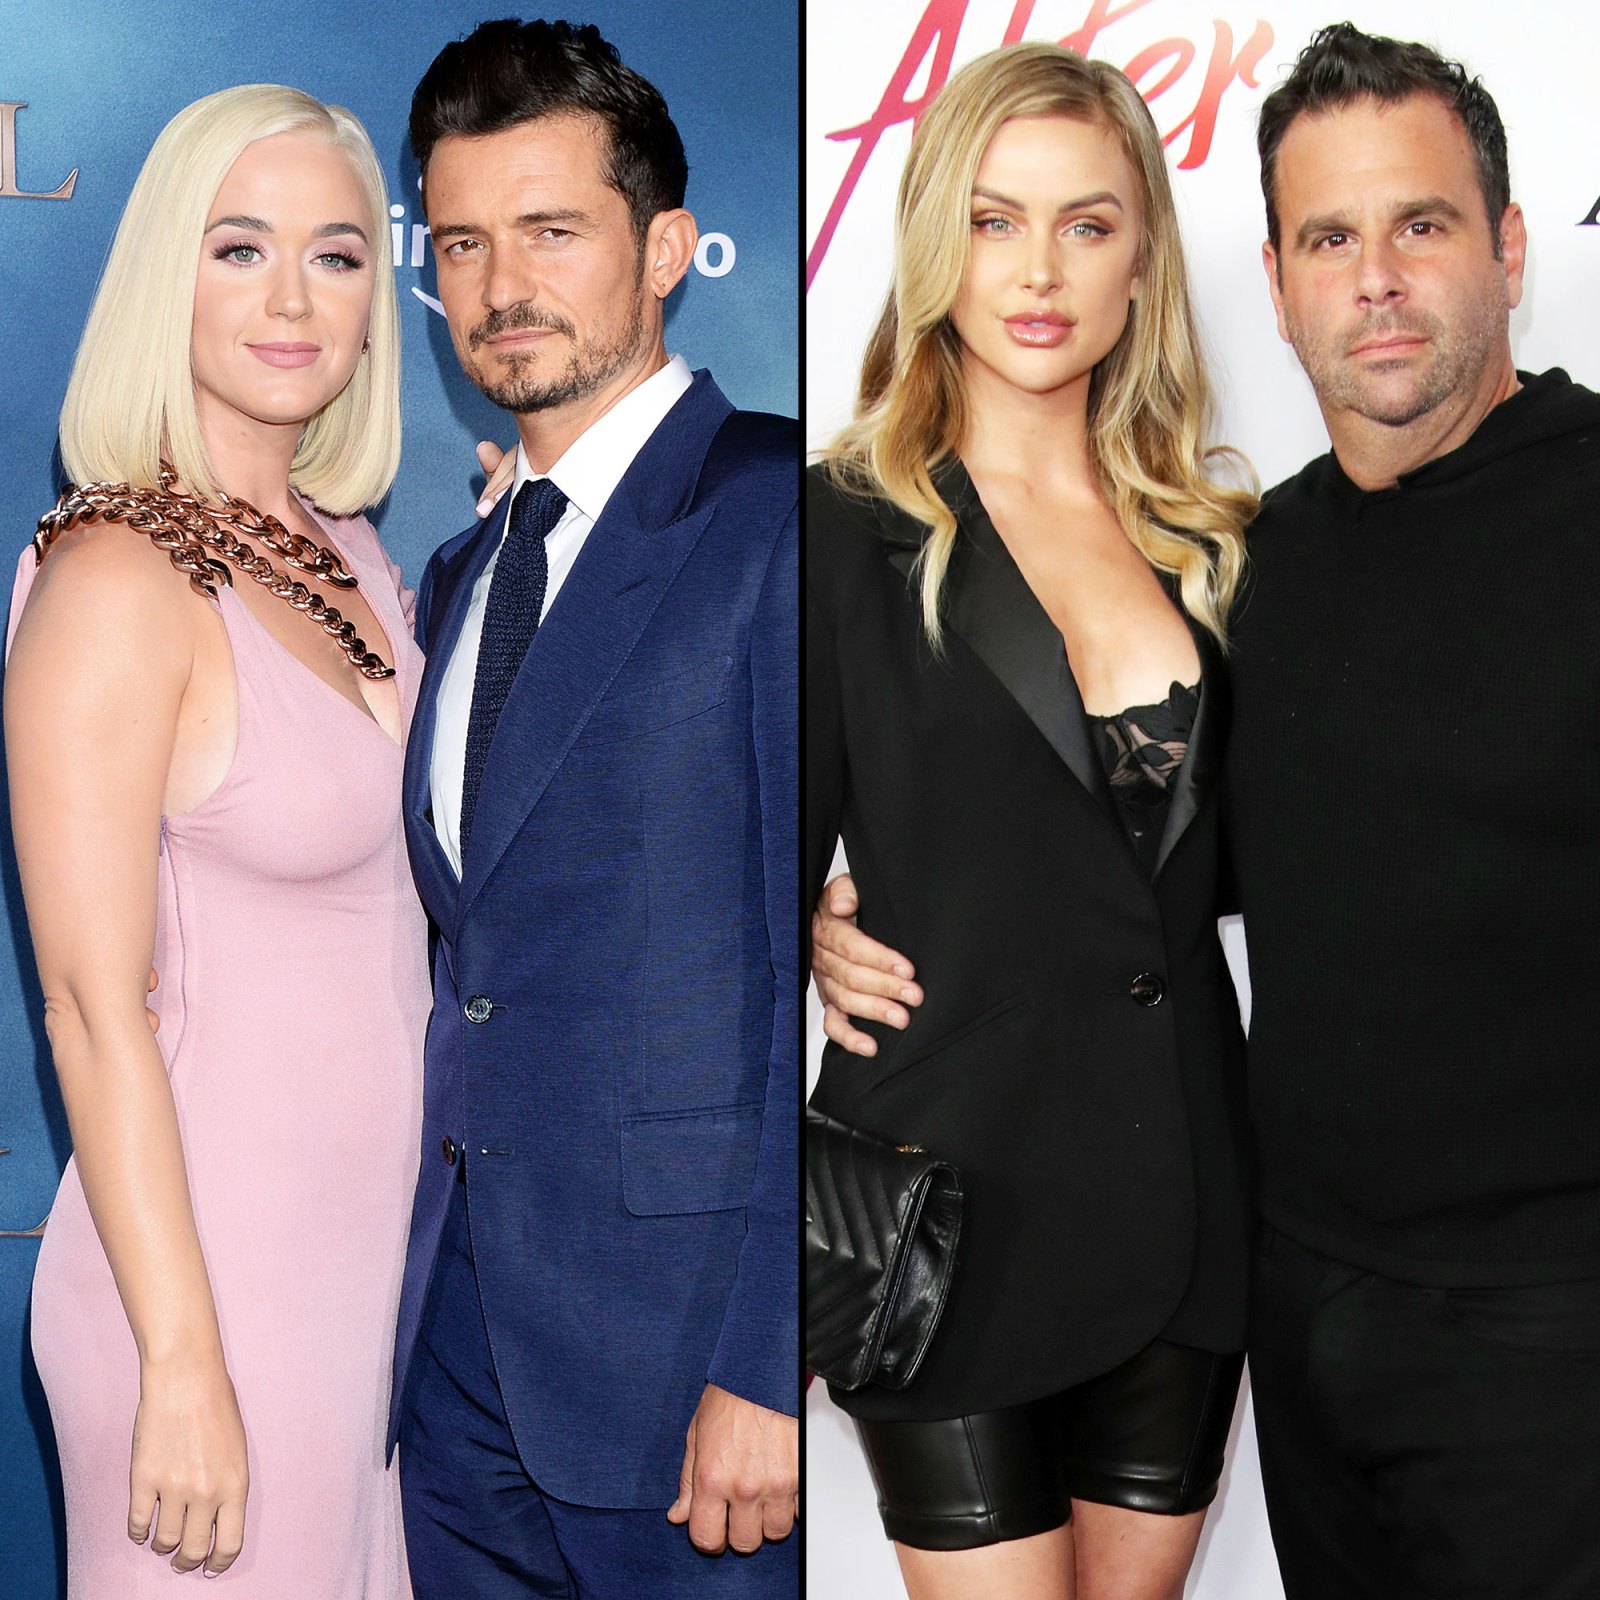 Katy Perry and Orlando Bloom and Lala Kent and Randall Emmett Stars Who Have Had to Postpone Weddings Amid Pandemic